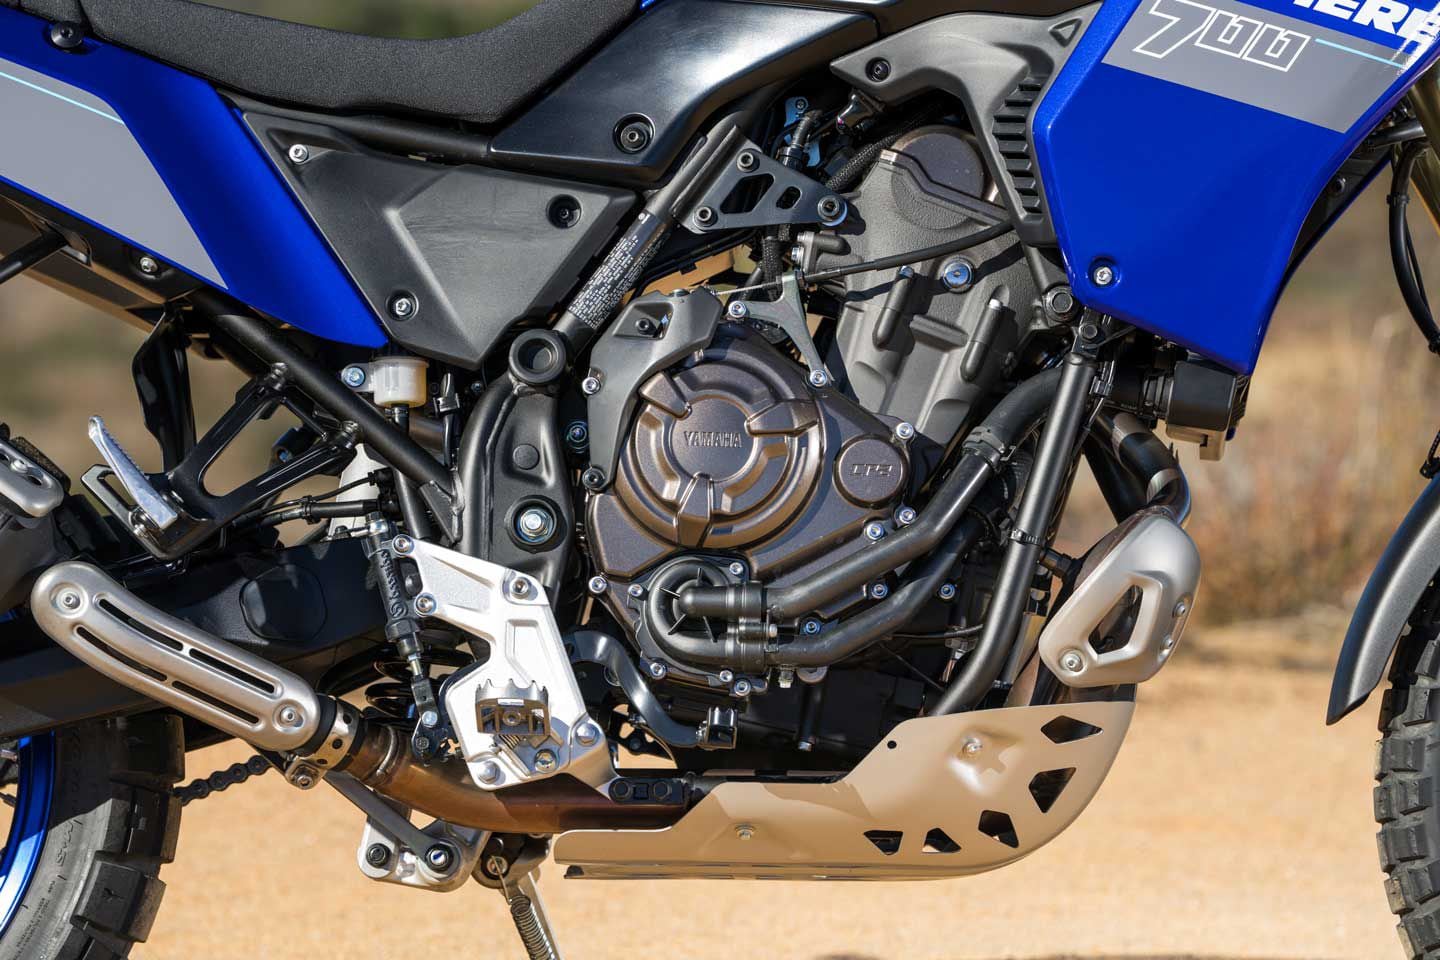 Yamaha’s 689cc CP2 parallel twin is the star of the show. Not only is it ultra compact, it has a pleasing character and pumps out a wide spread of power.